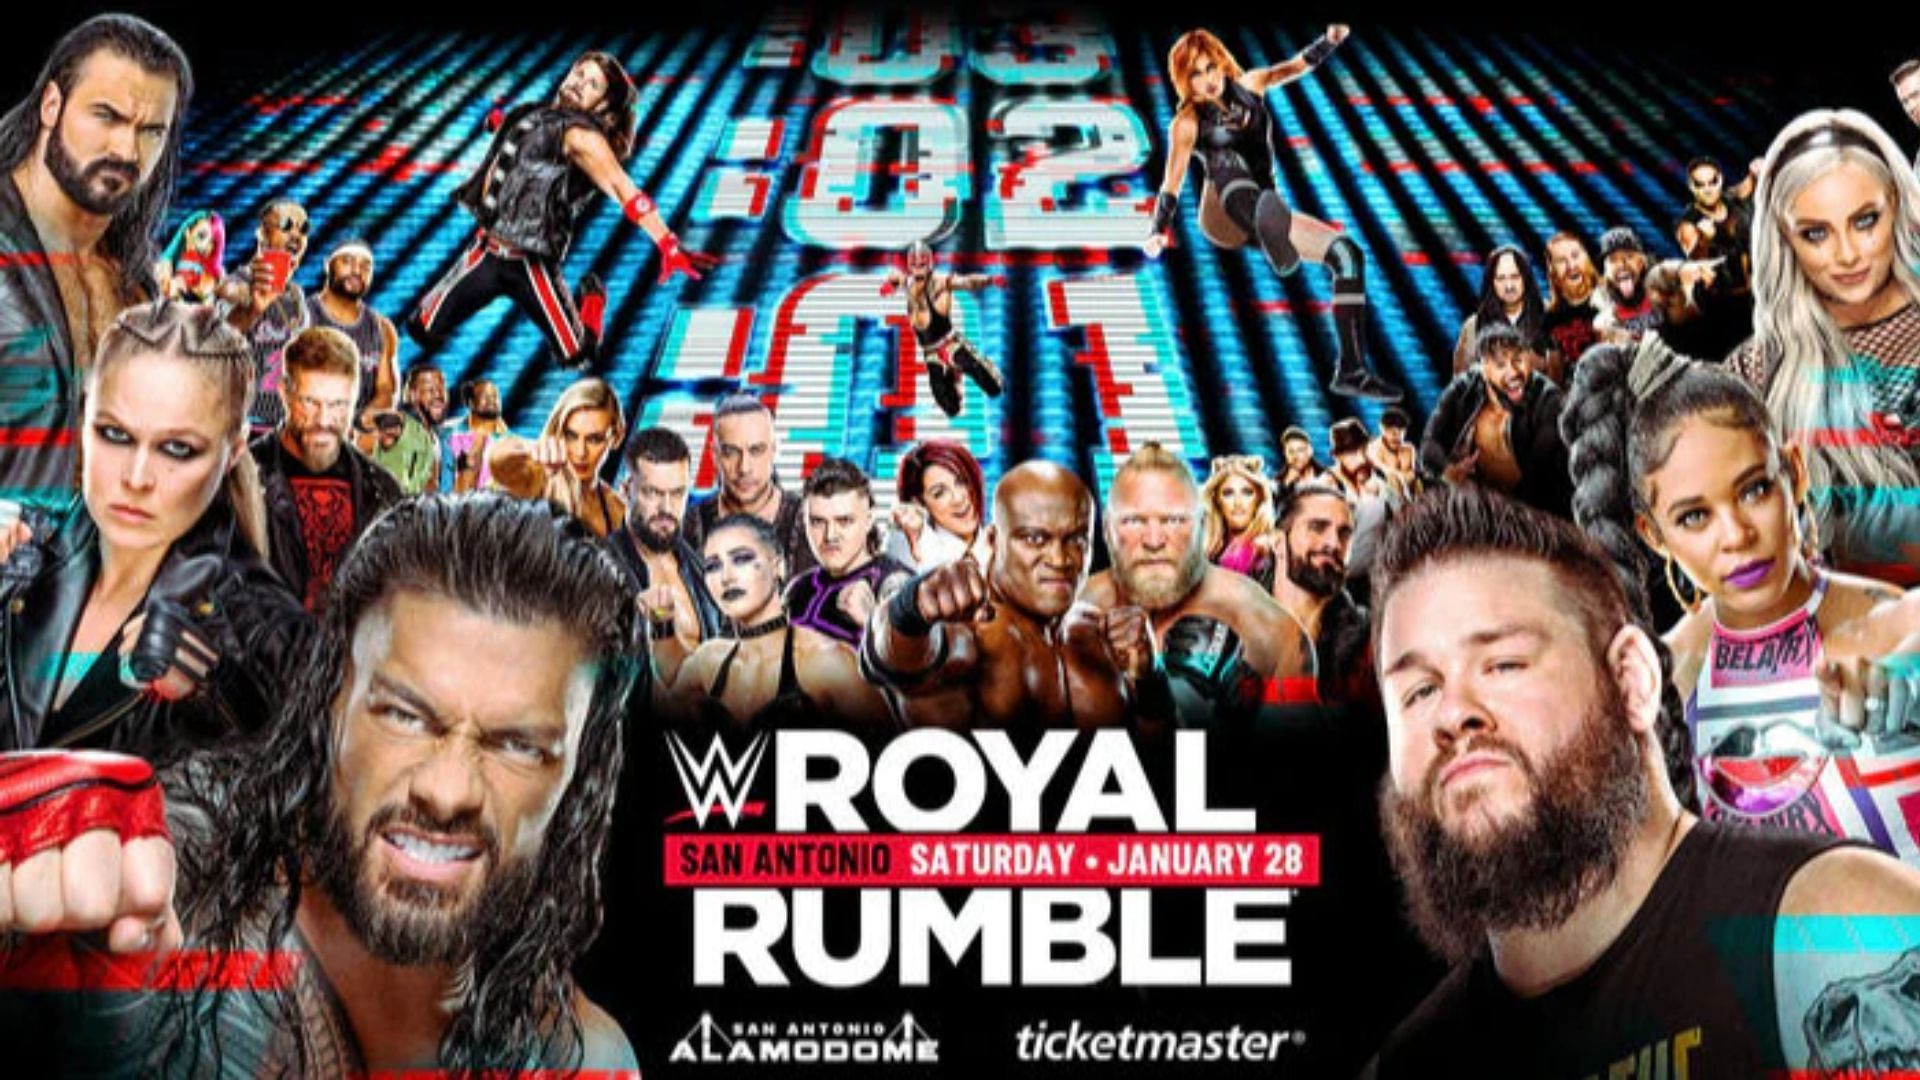 Royal Rumble is set to take place at the Alamodome in San Antonio, Texas on January 28, 2023